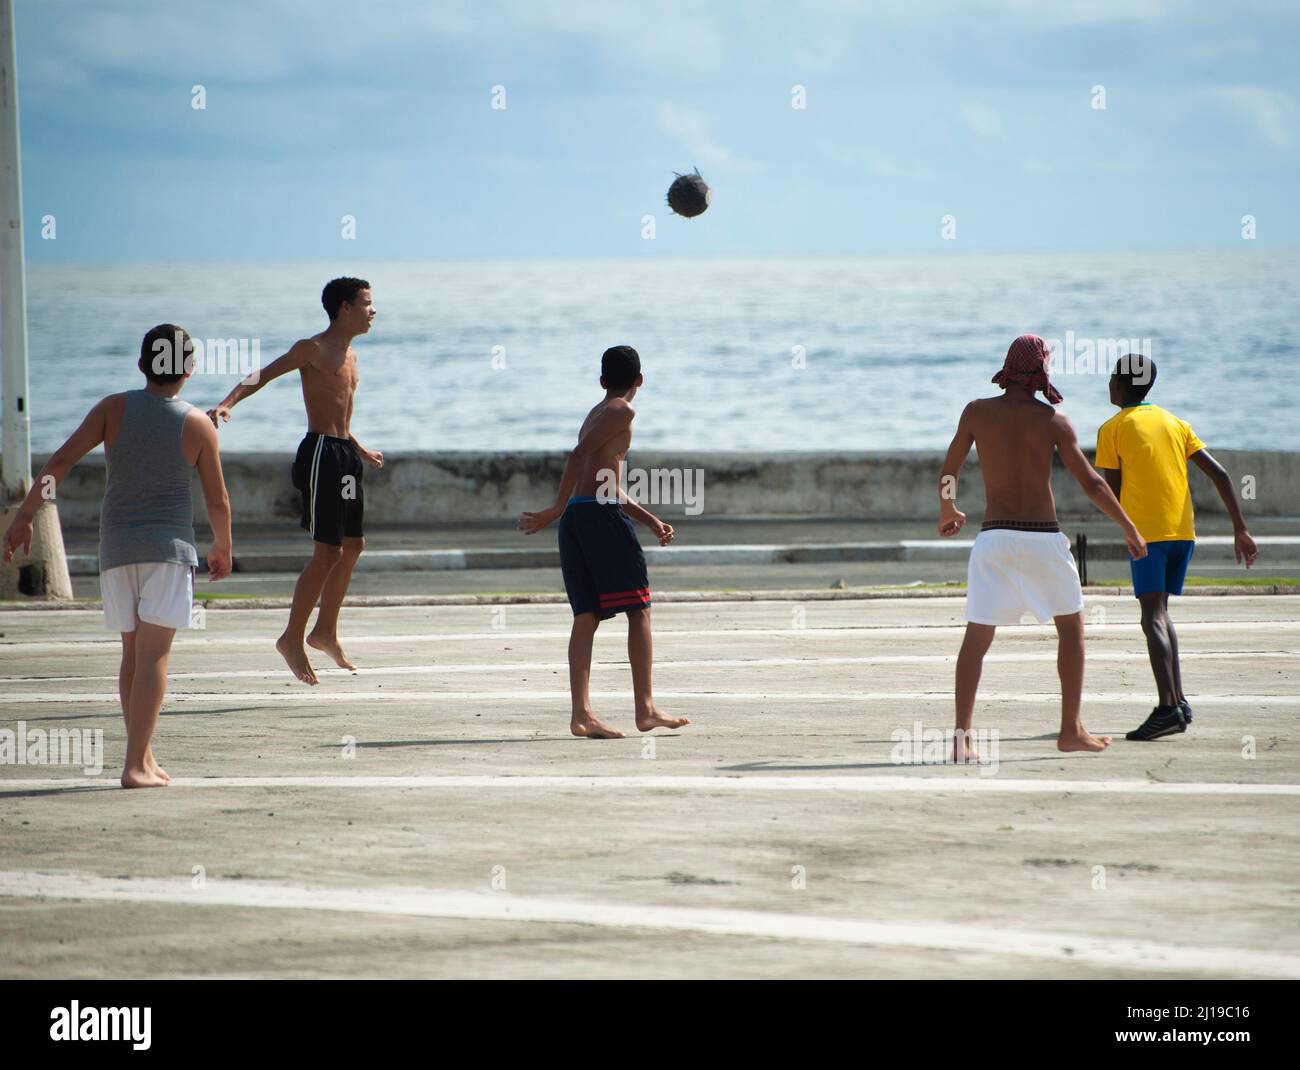 sYoung boys playing soccer on a street by the ocean in Stock Photo